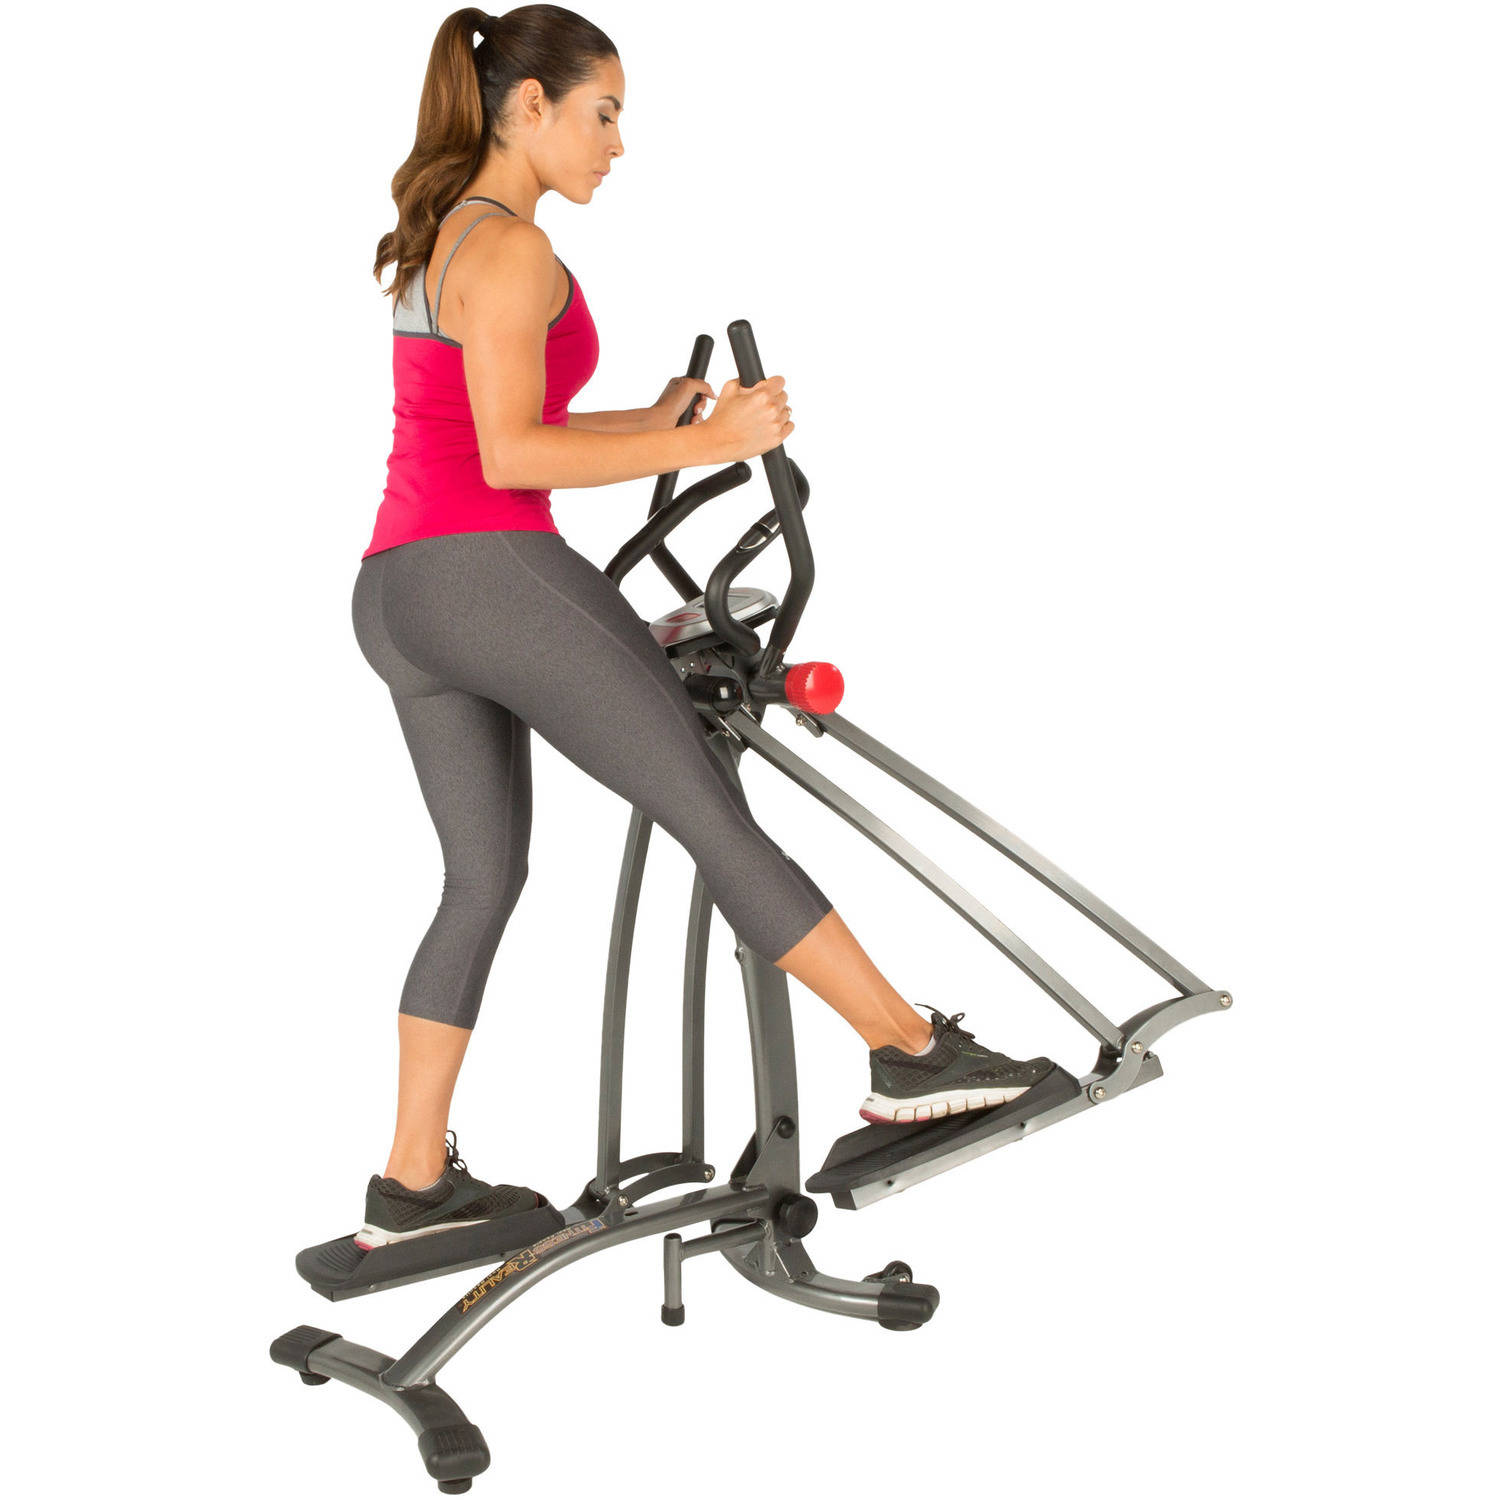 Fitness Reality Multi-Direction Elliptical Cloud Walker X1 with Pulse Sensors - image 18 of 31